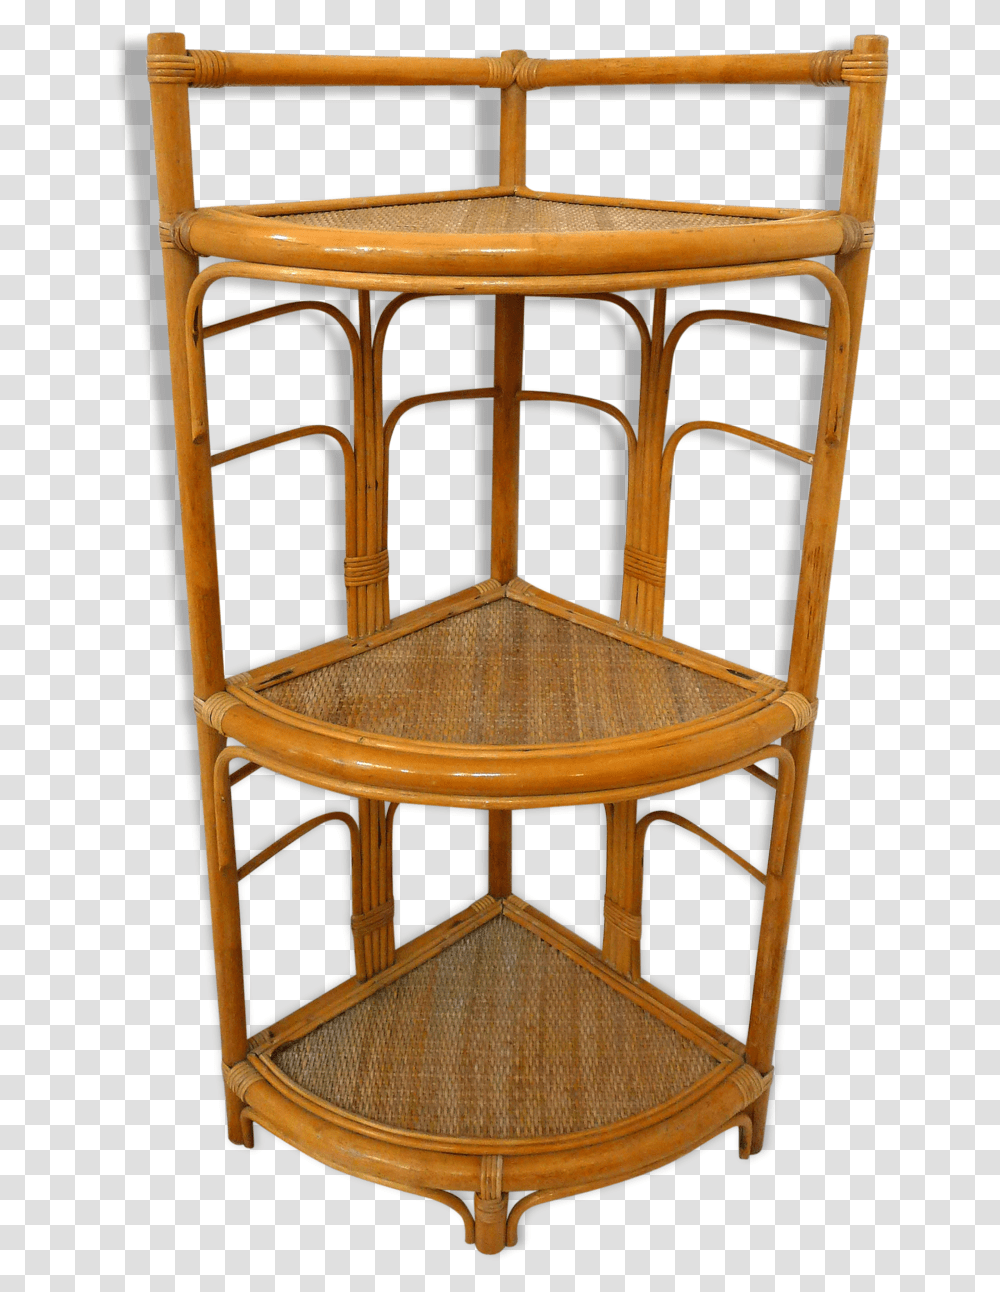 Vintage Corner Shelf In Rattan And WickerSrc Https, Chair, Furniture, Table, Wood Transparent Png